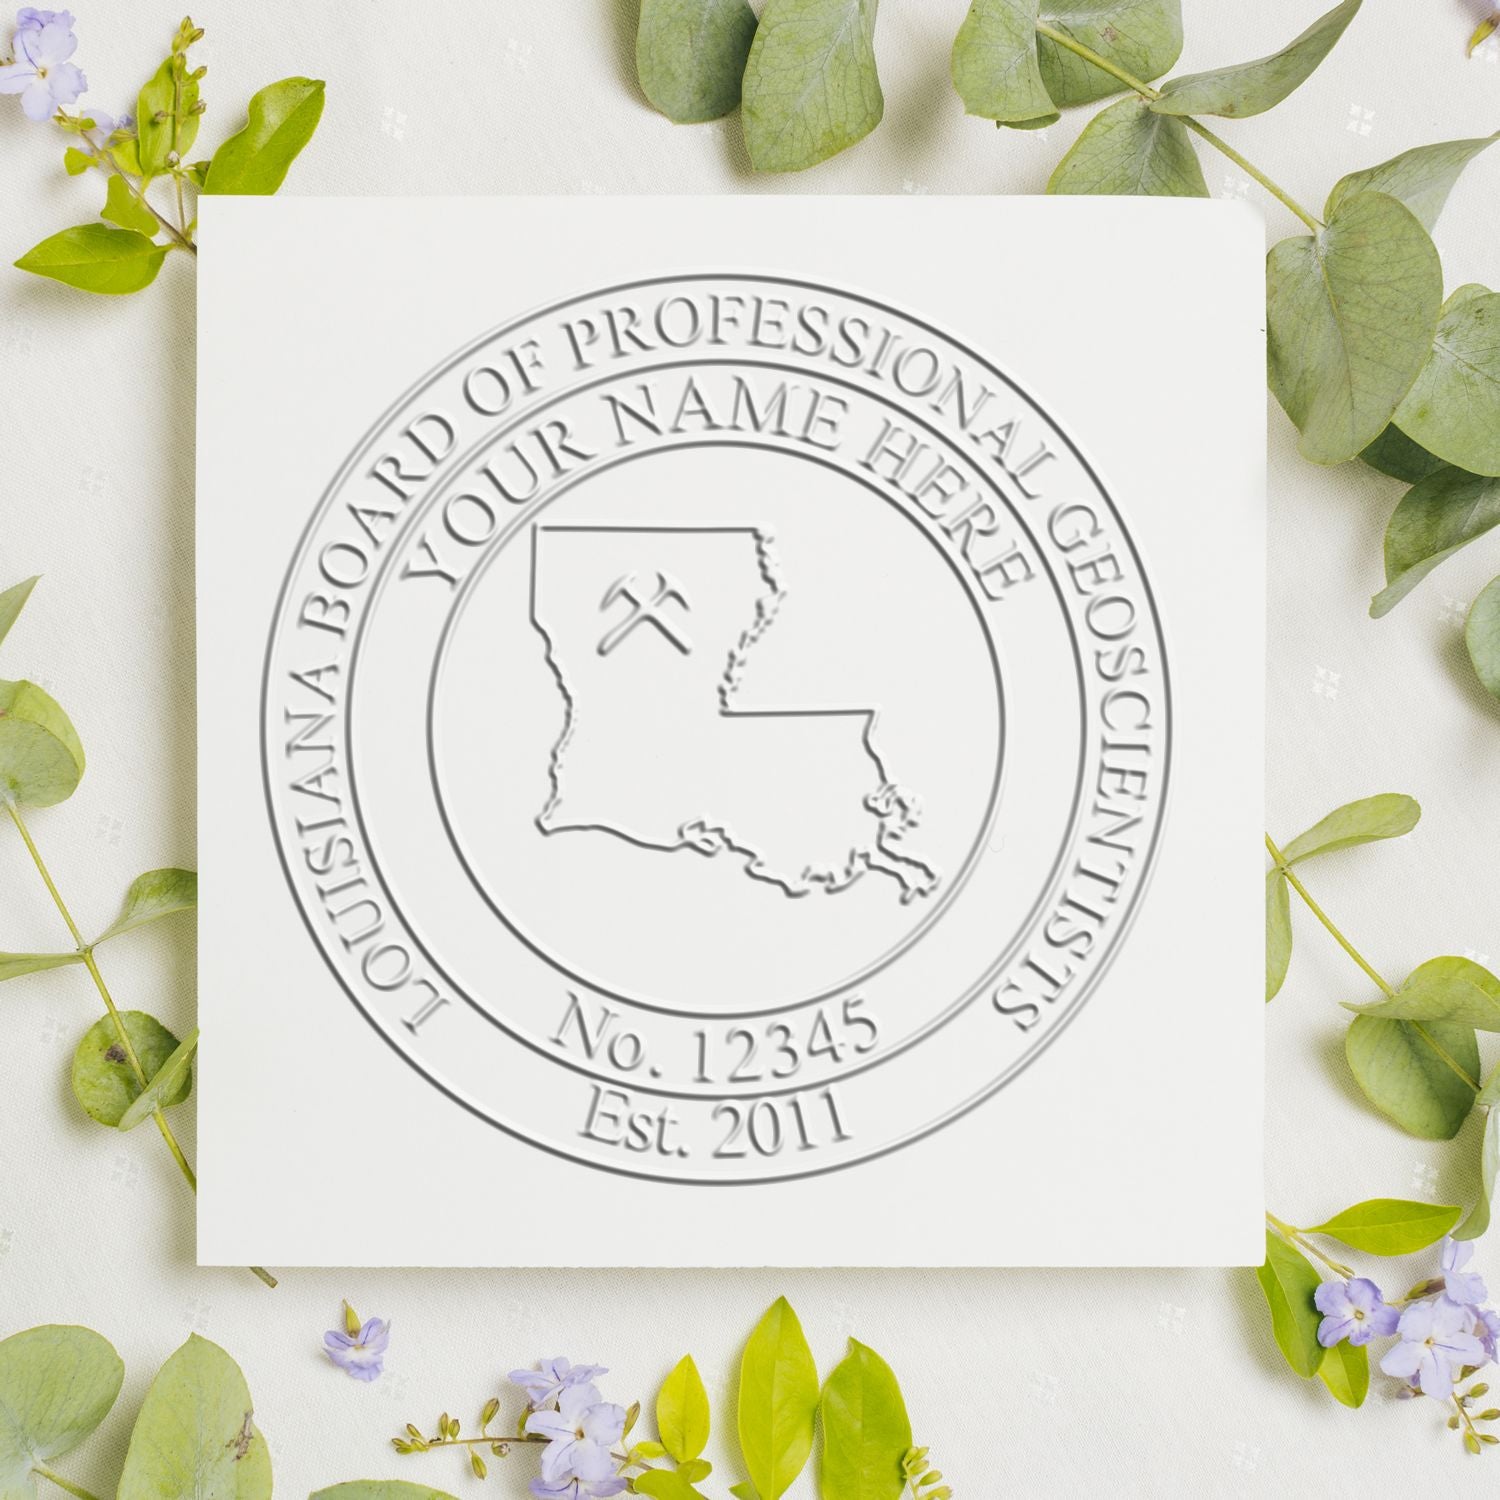 The main image for the State of Louisiana Extended Long Reach Geologist Seal depicting a sample of the imprint and imprint sample